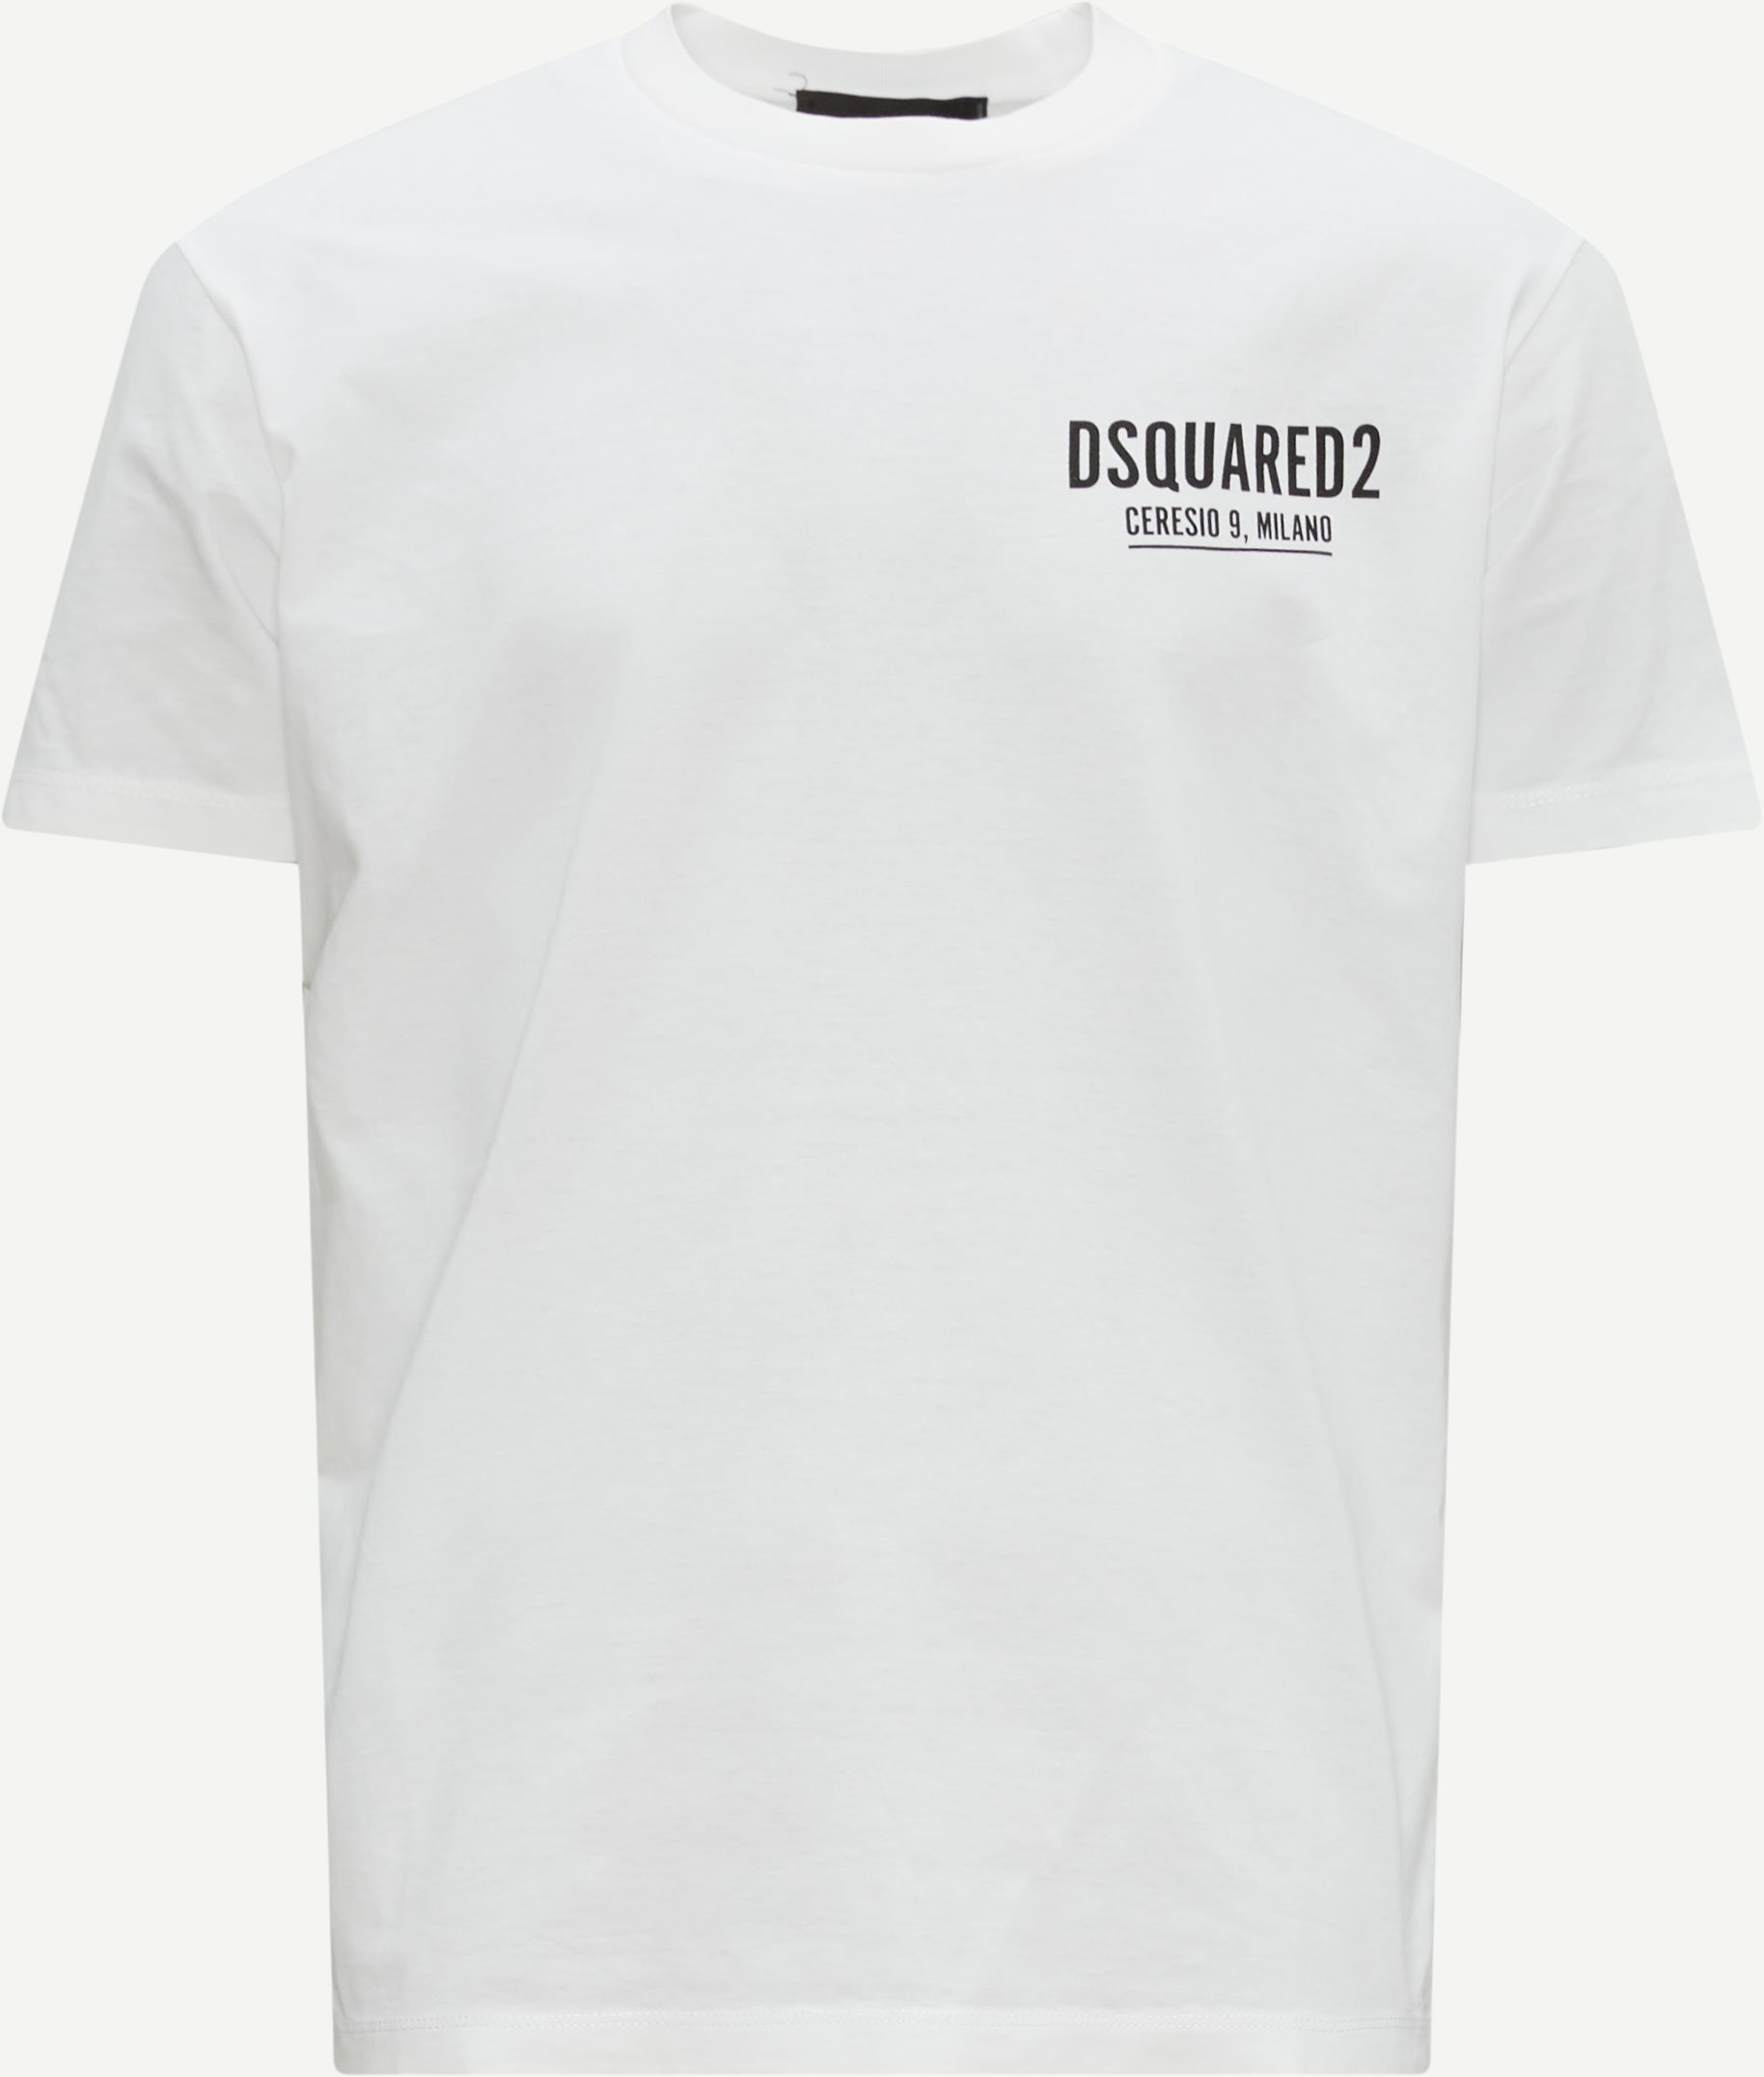 Dsquared2 T-shirts S71GD1116 S23009 White